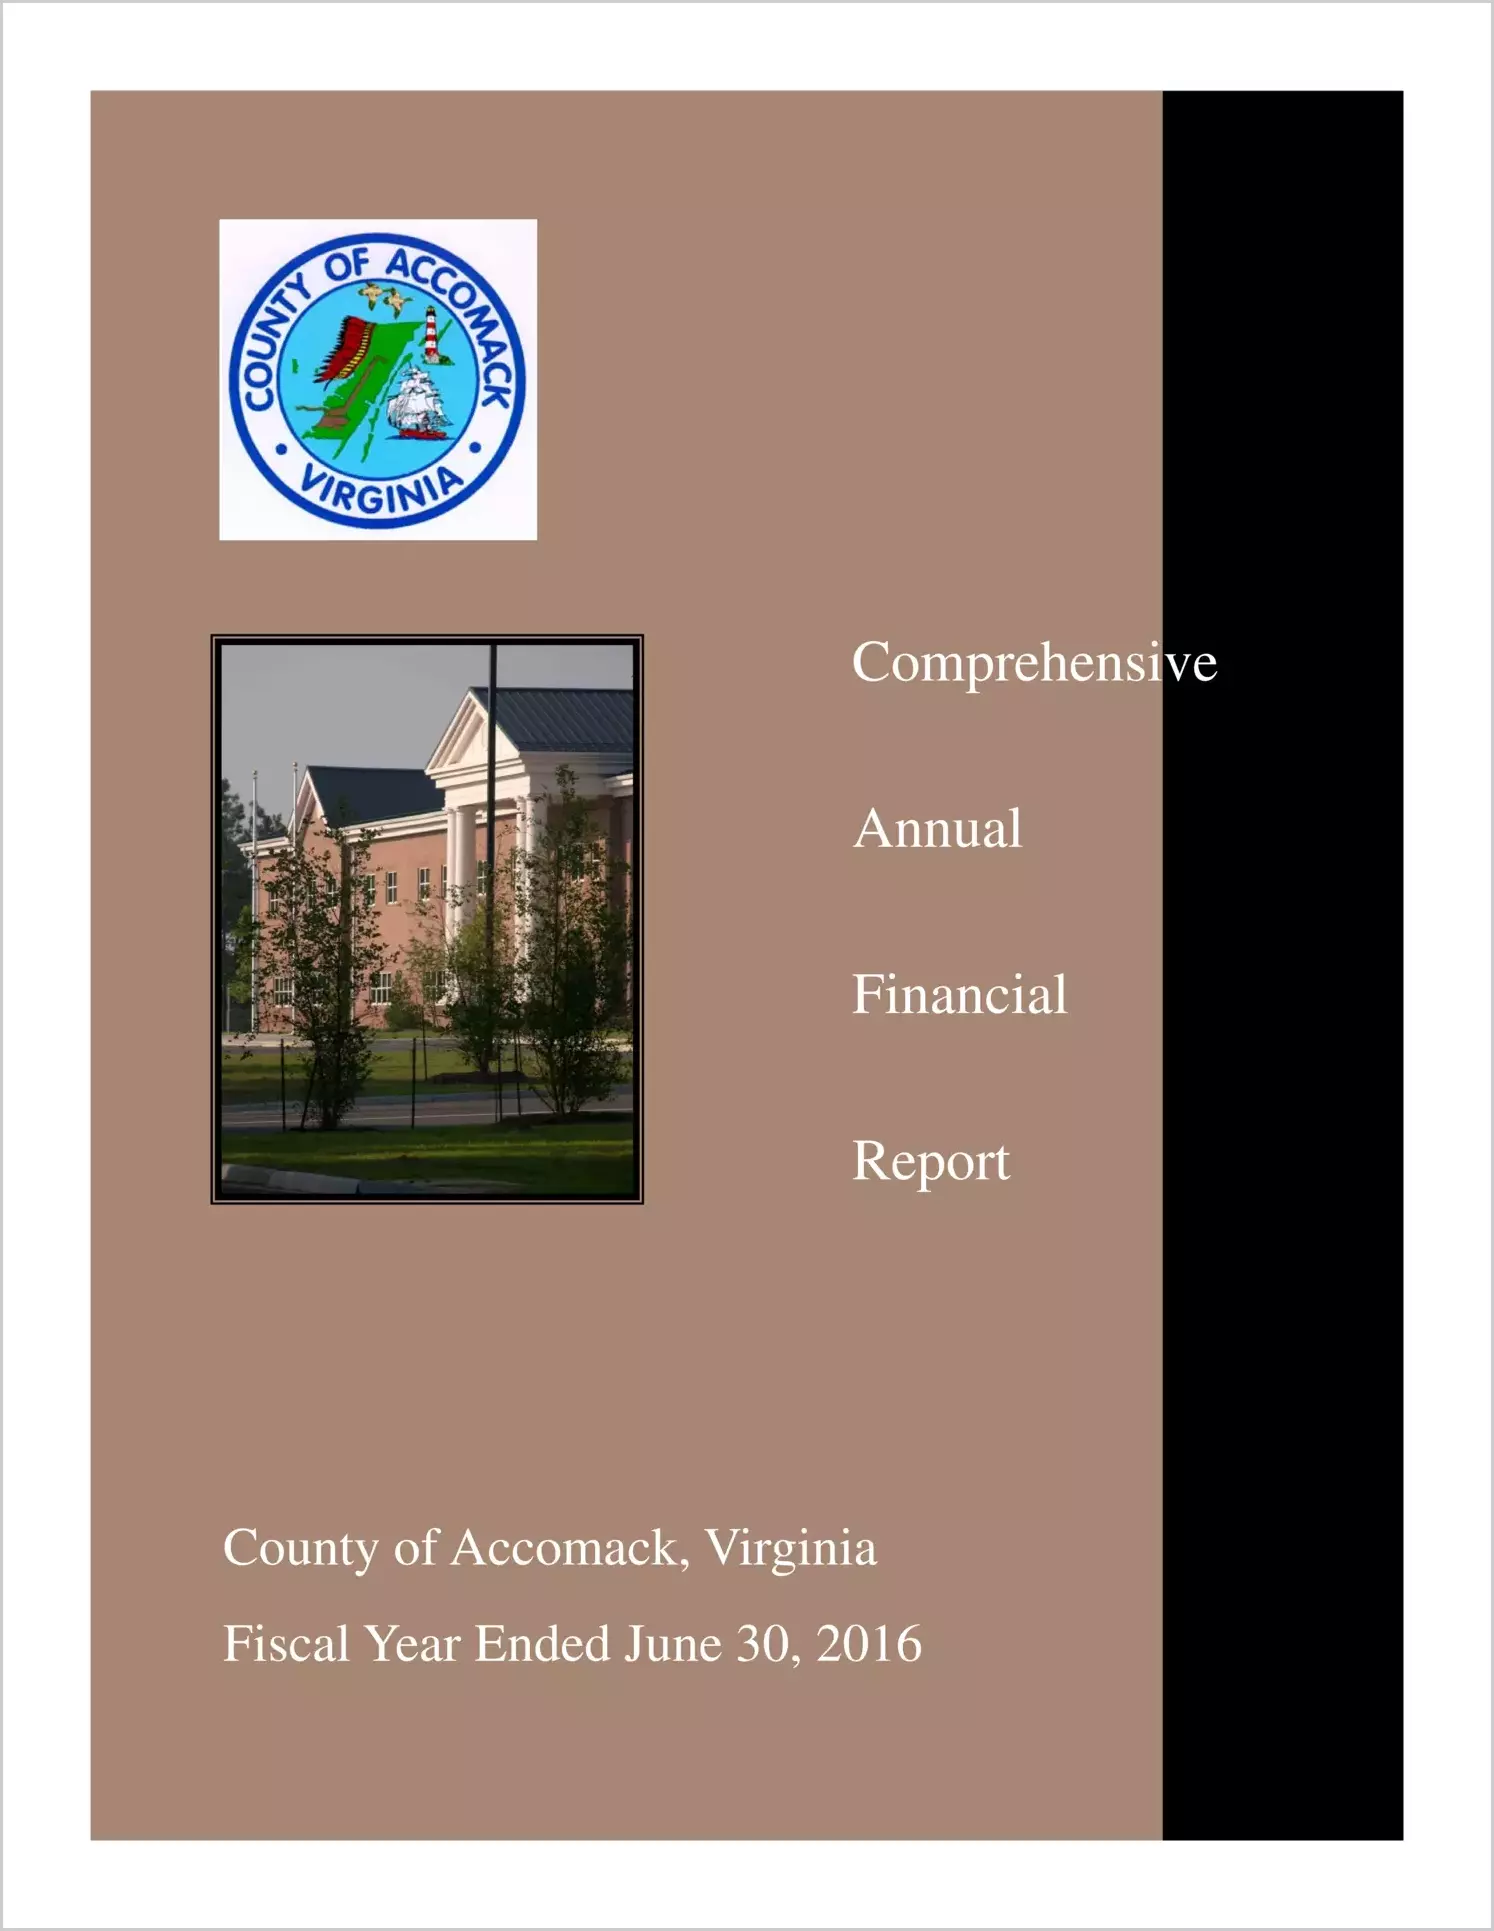 2016 Annual Financial Report for County of Accomack